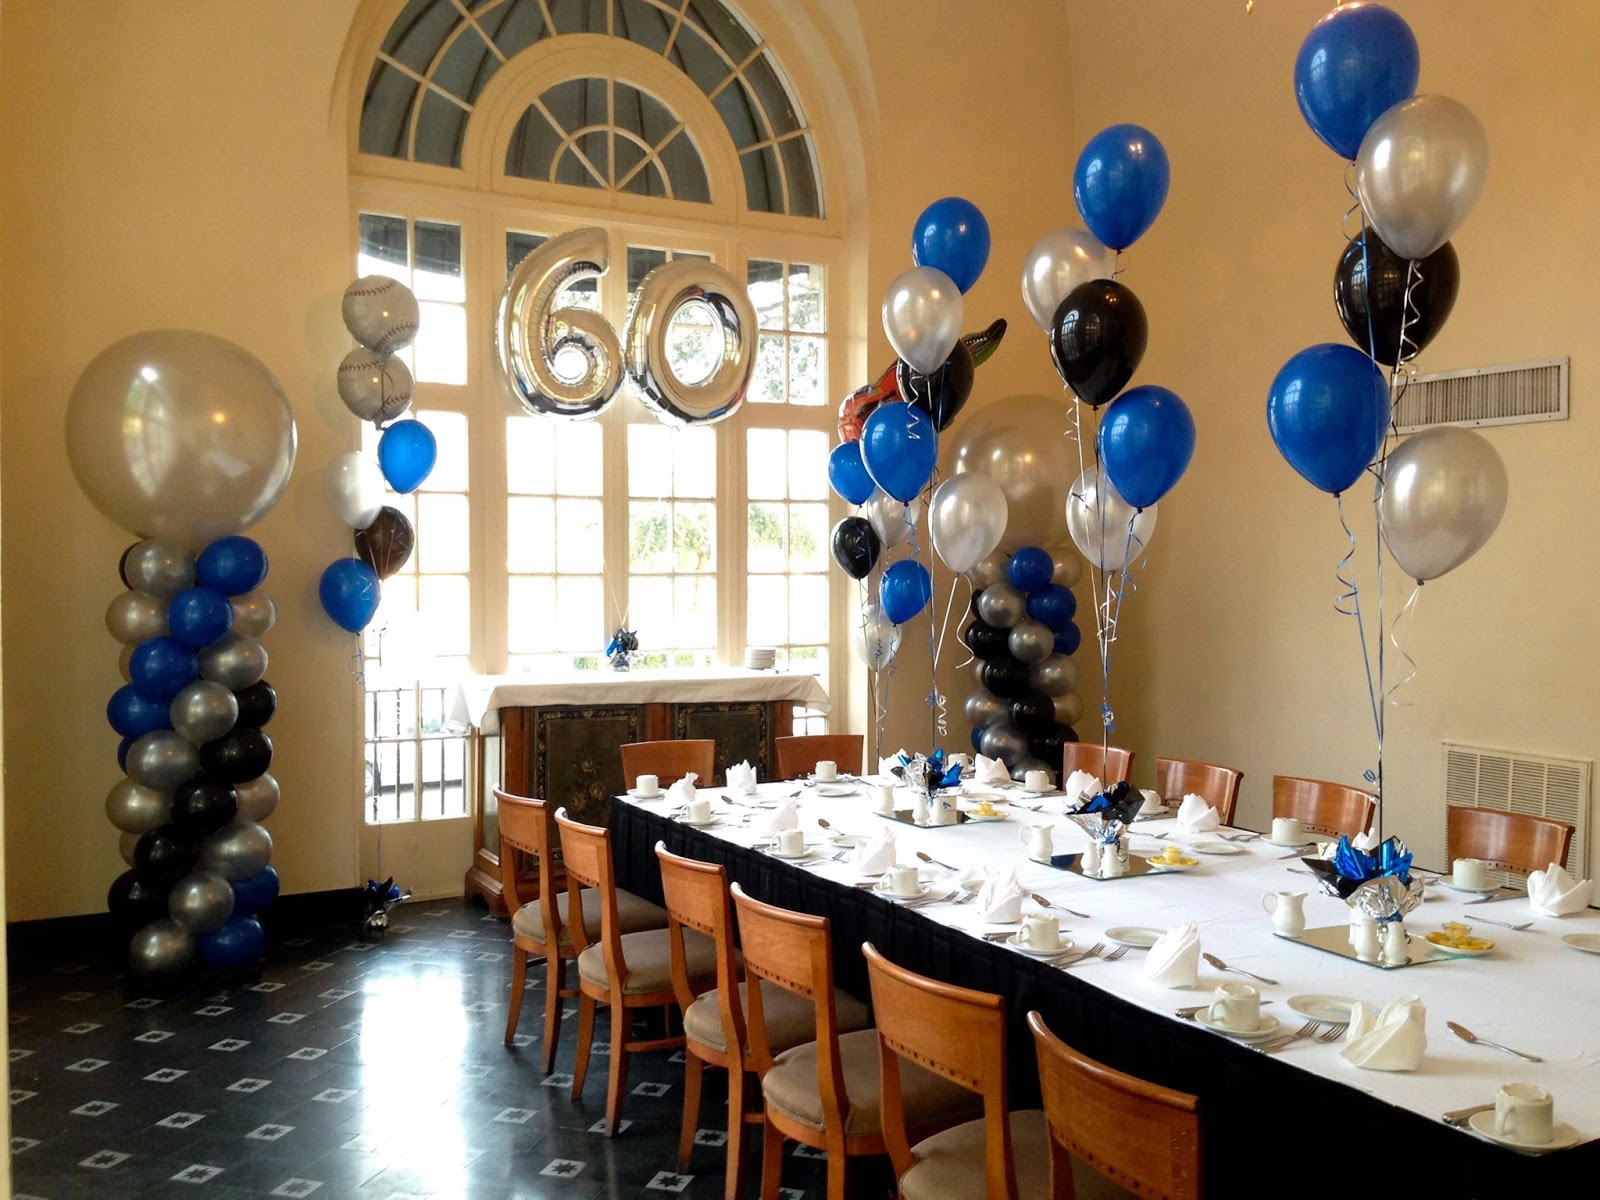 Party People Event Decorating Company: 60th Birthday Party! Terrace Hotel